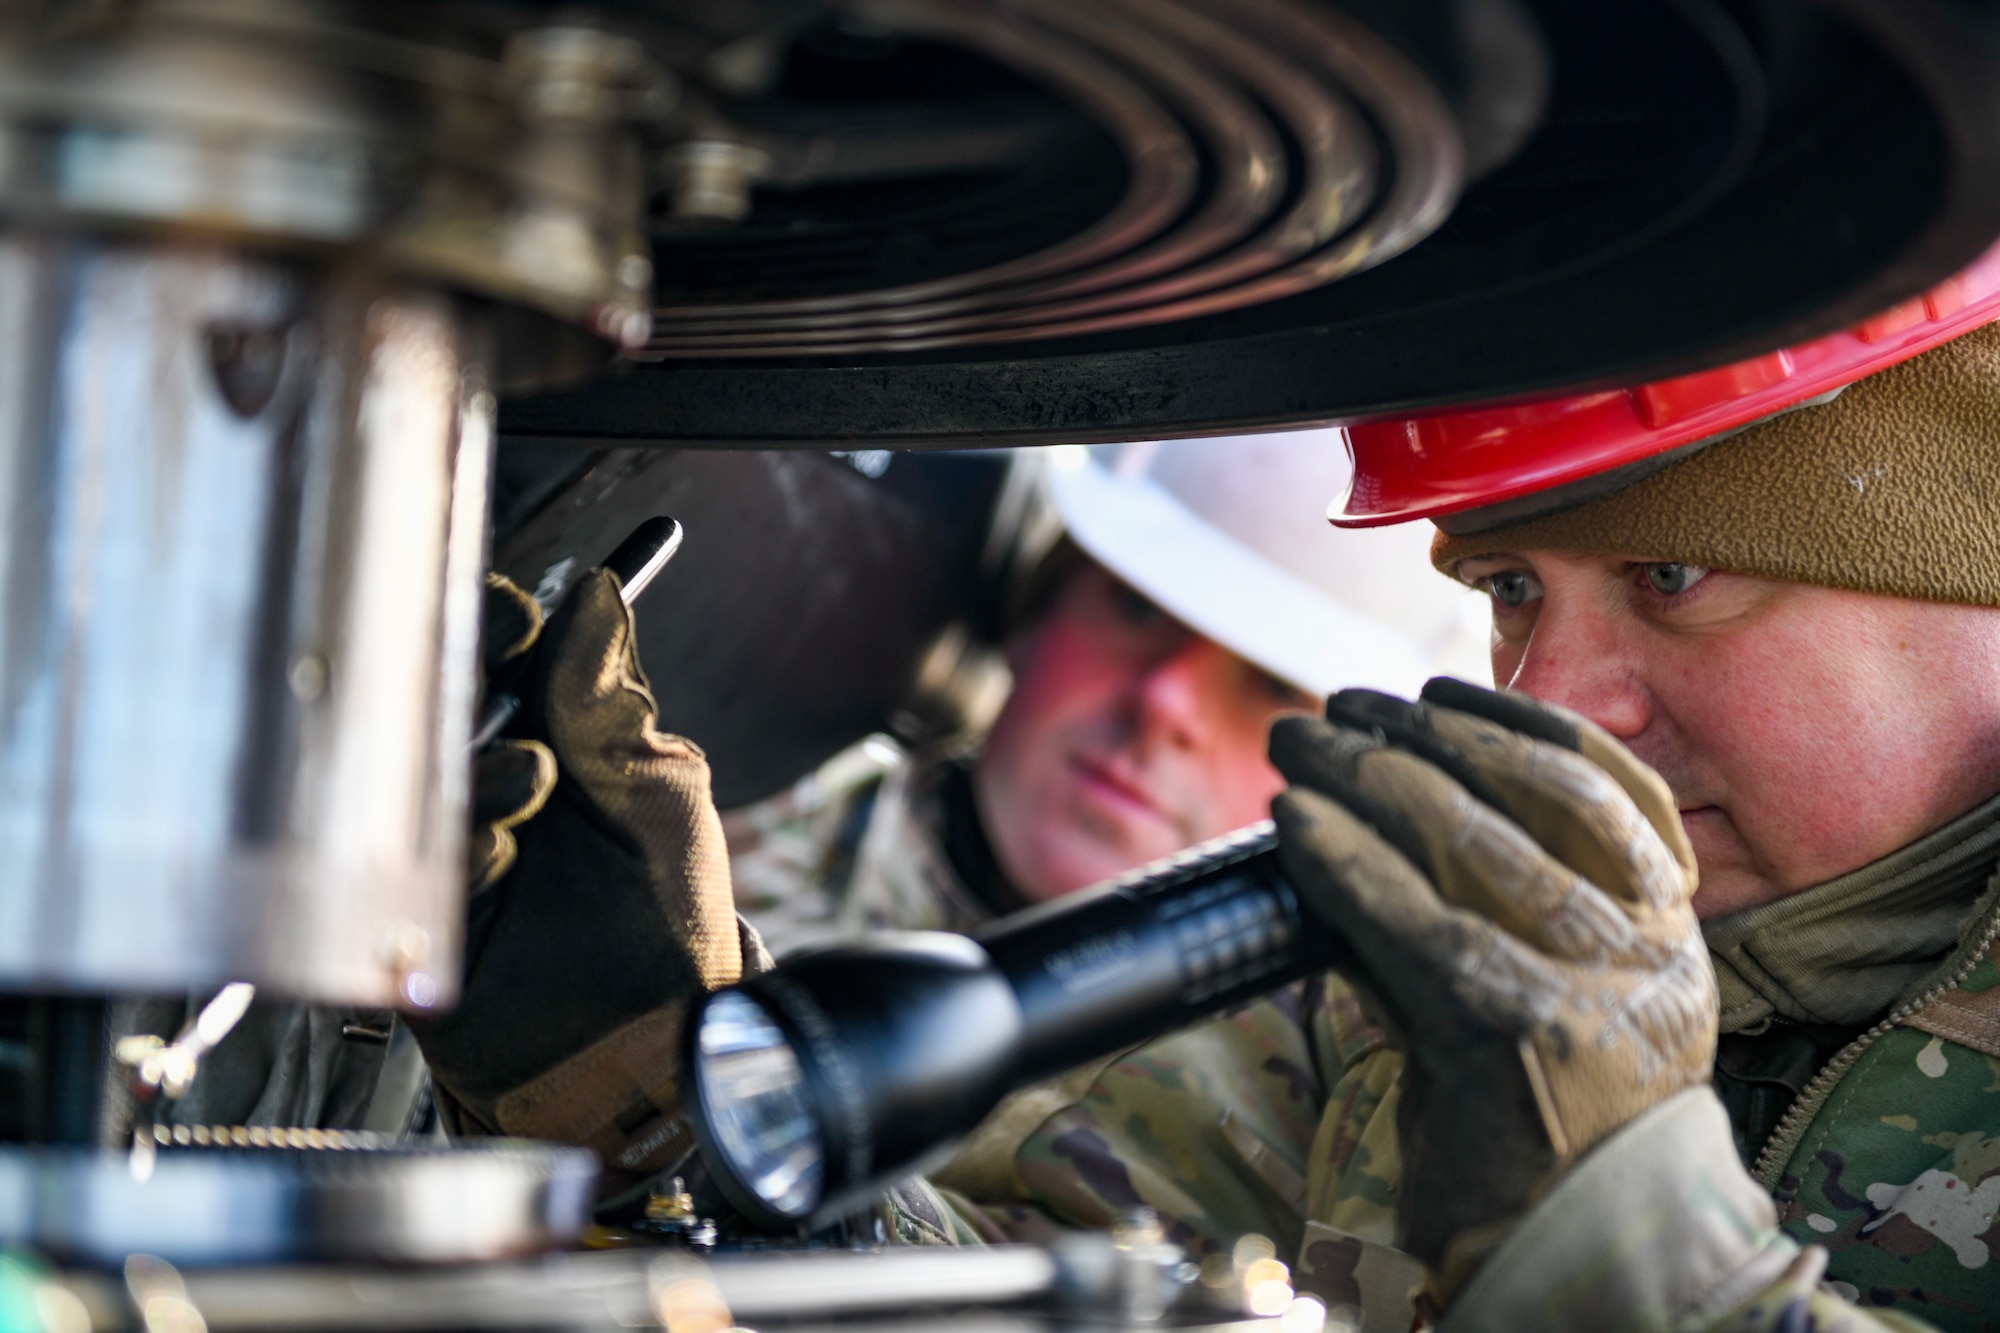 Tech. Sgt. Steven Lew, an aerospace propulsion technician assigned to the 910th Aircraft Maintenance Squadron, inspects a C-130H Hercules aircraft propeller, Jan. 17, 2023, at Mountain Home Air Force Base, Idaho.